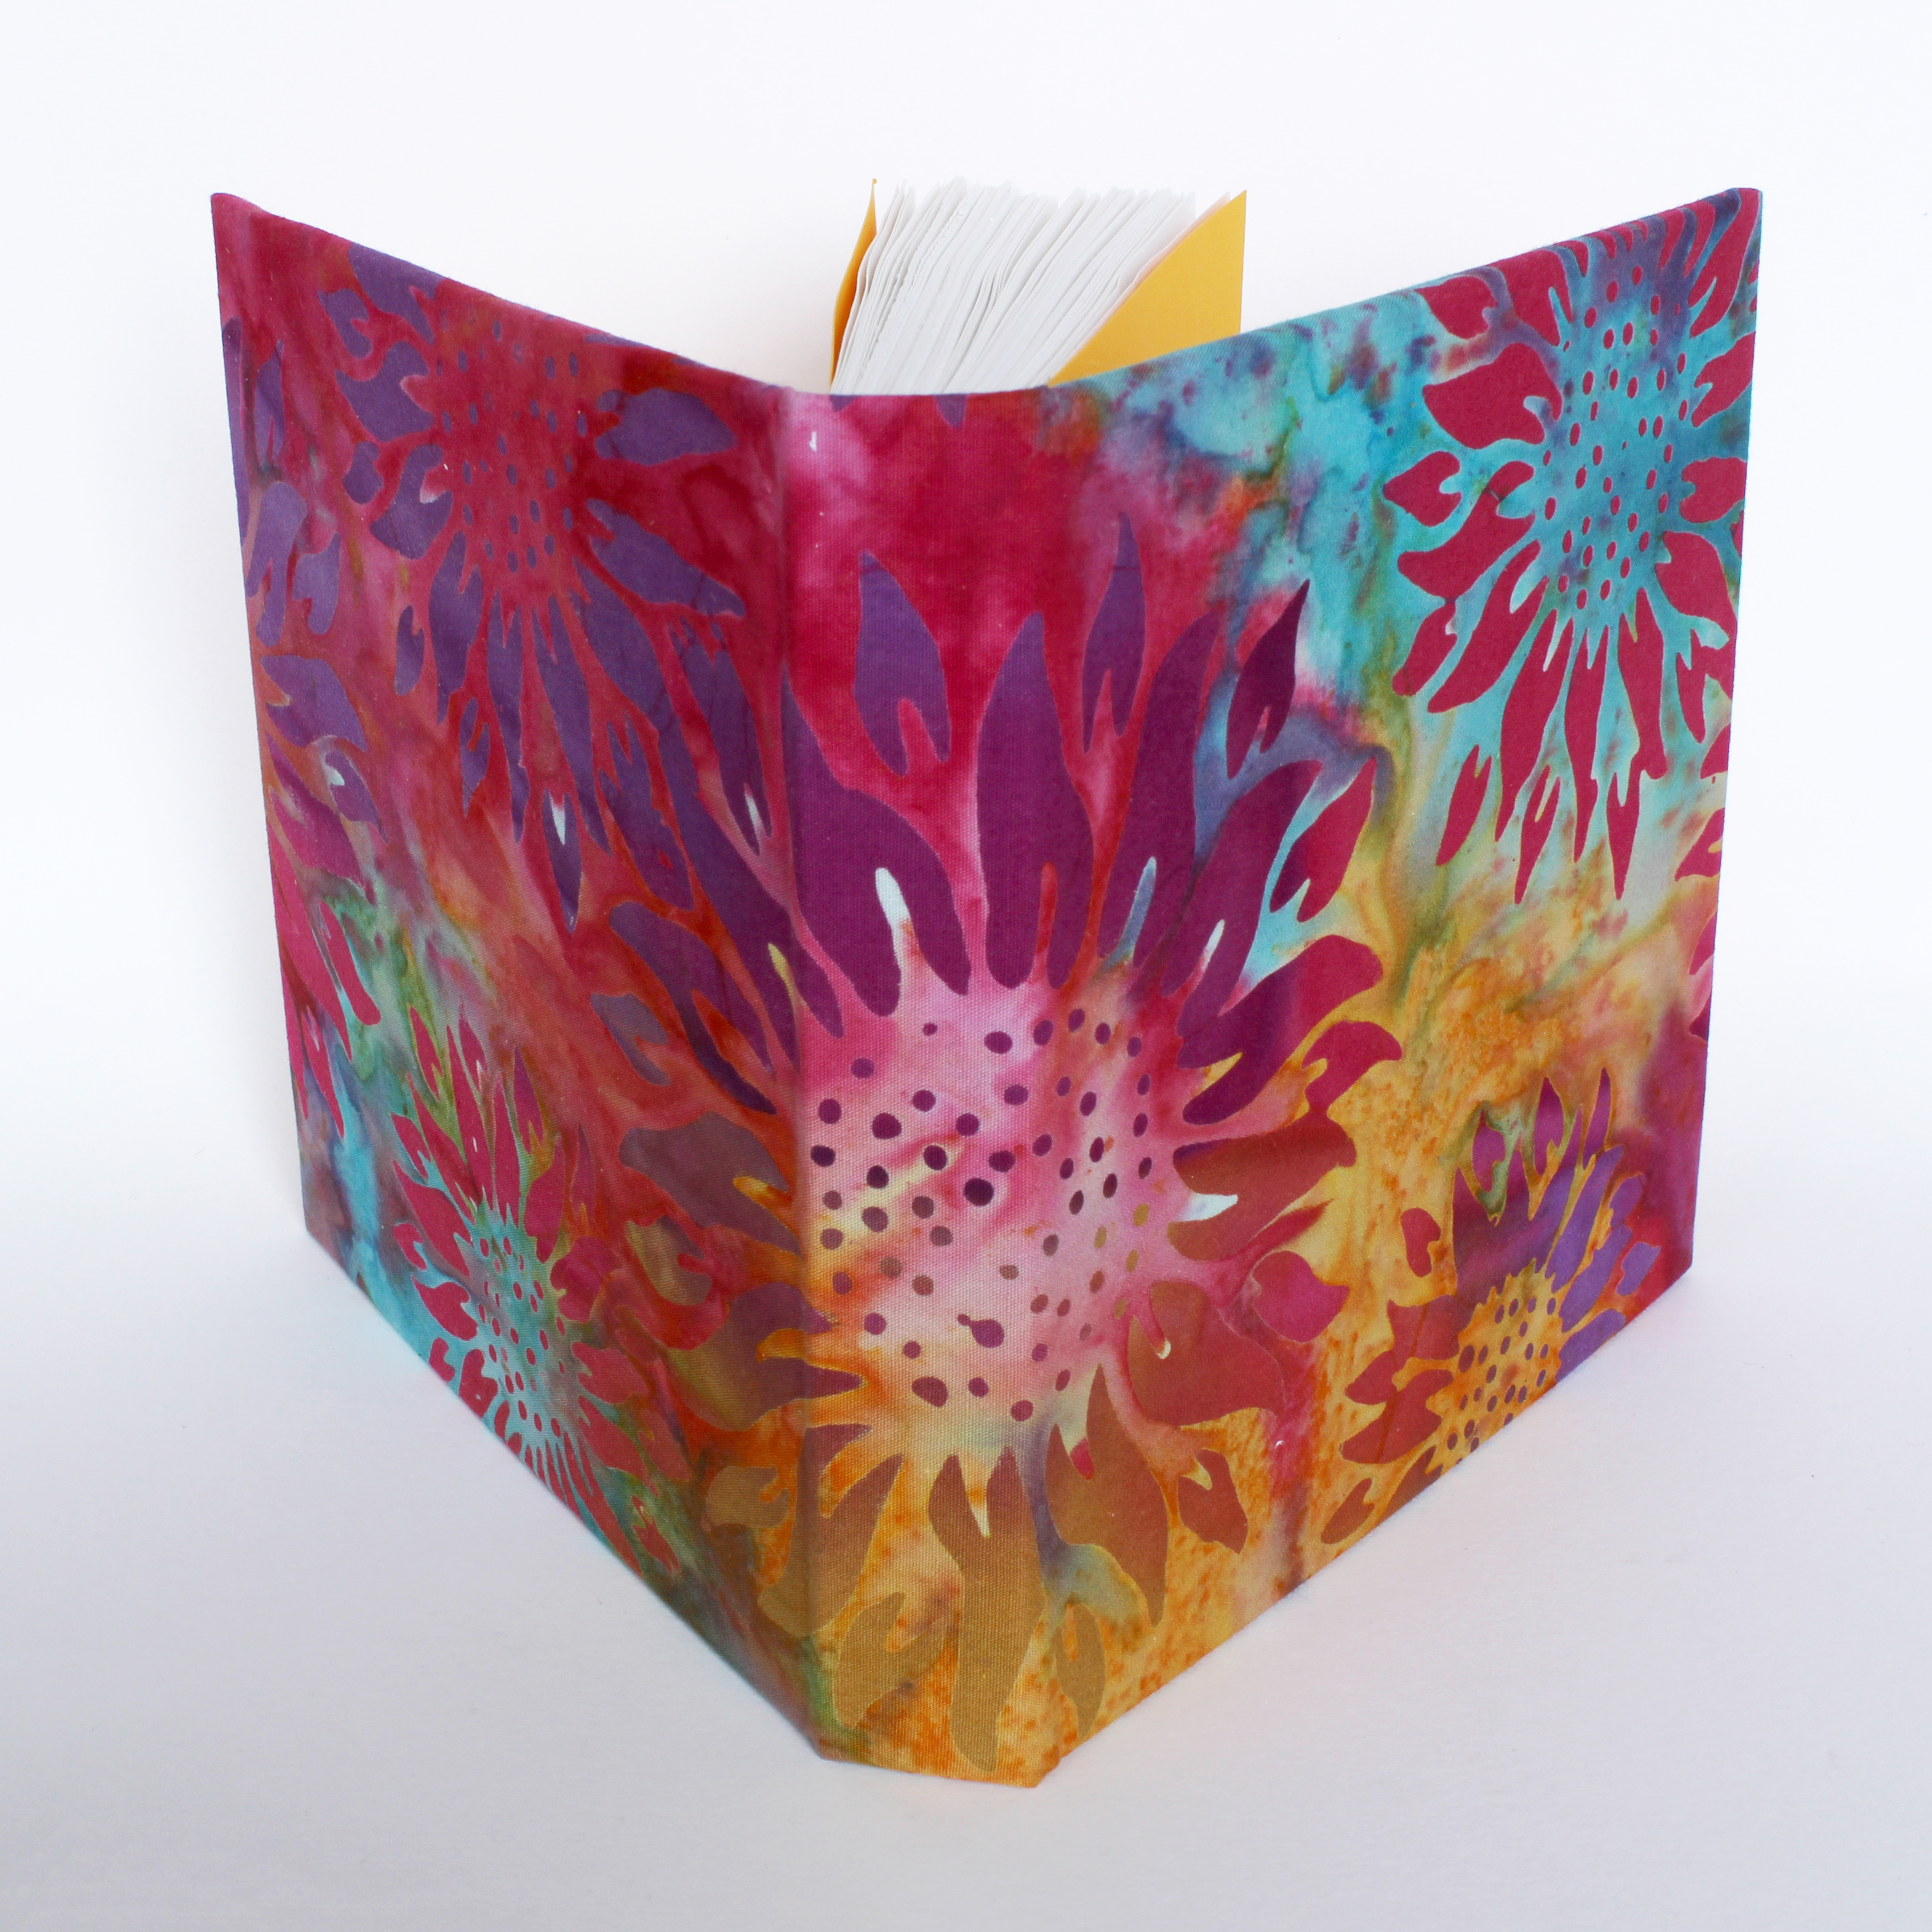 square sketchbook with batik covers